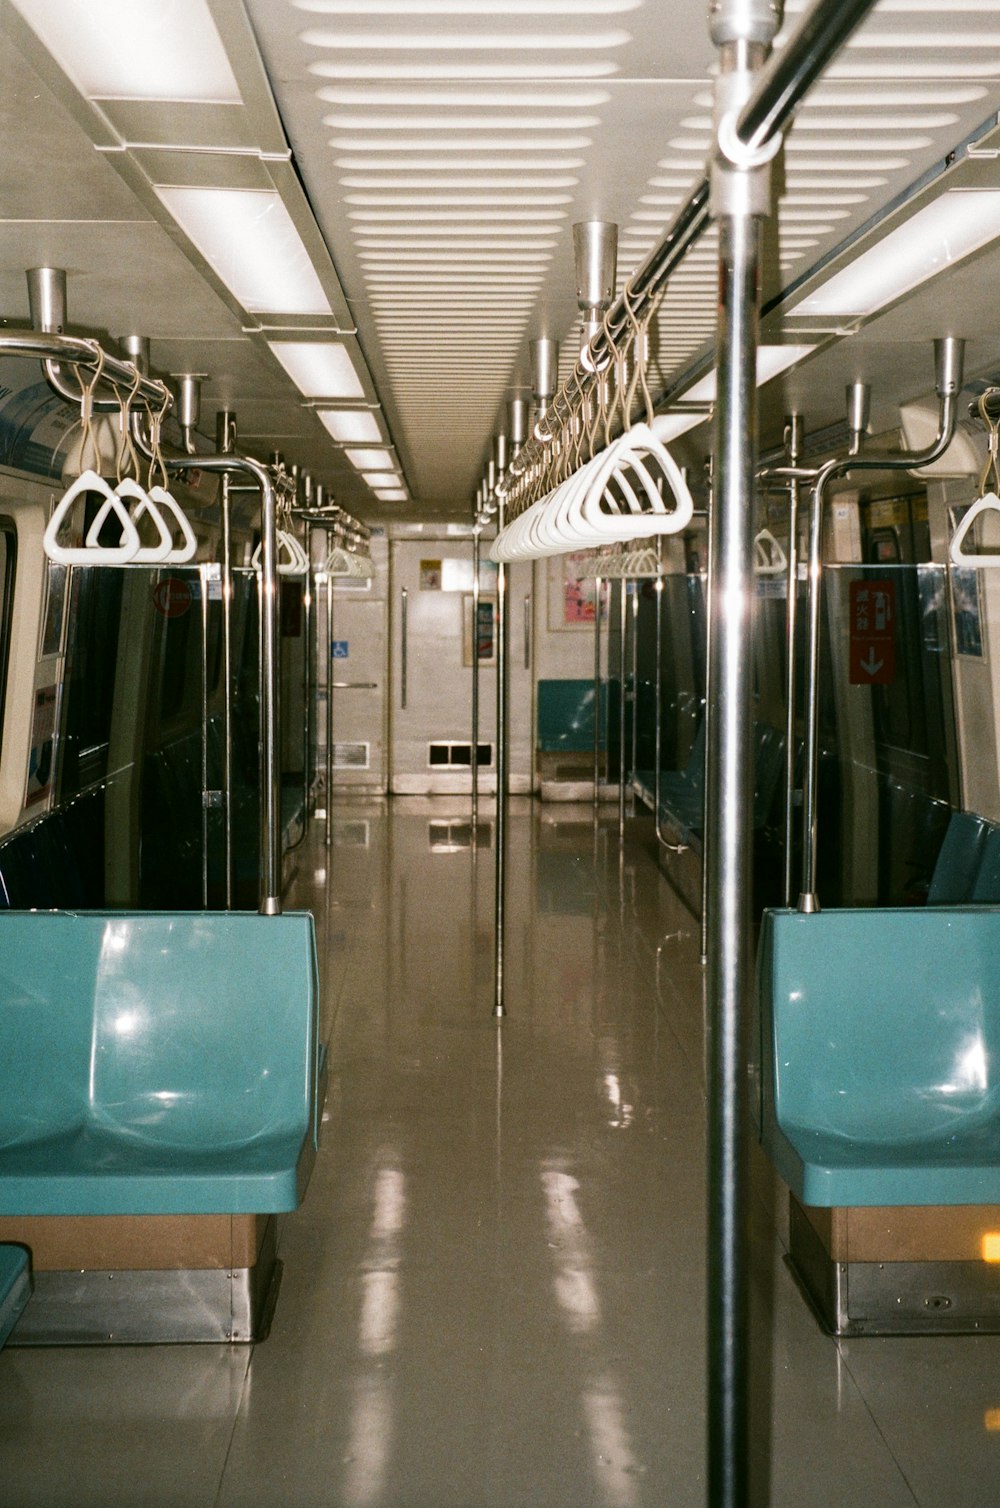 a subway car with blue seats and metal rails